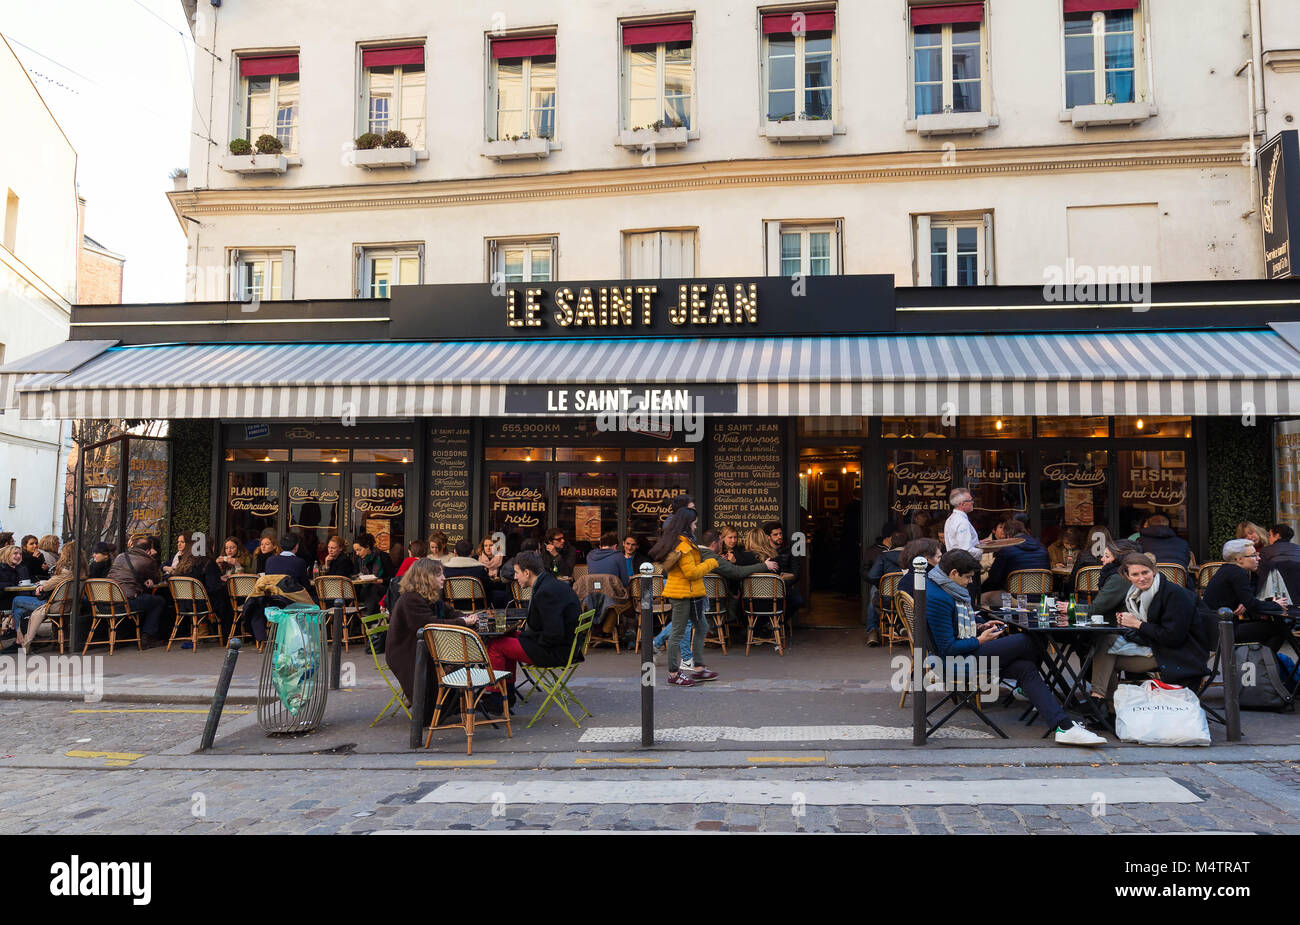 The Cafe Saint Jean is a cafe in the Montmartre, Paris, France. Stock Photo